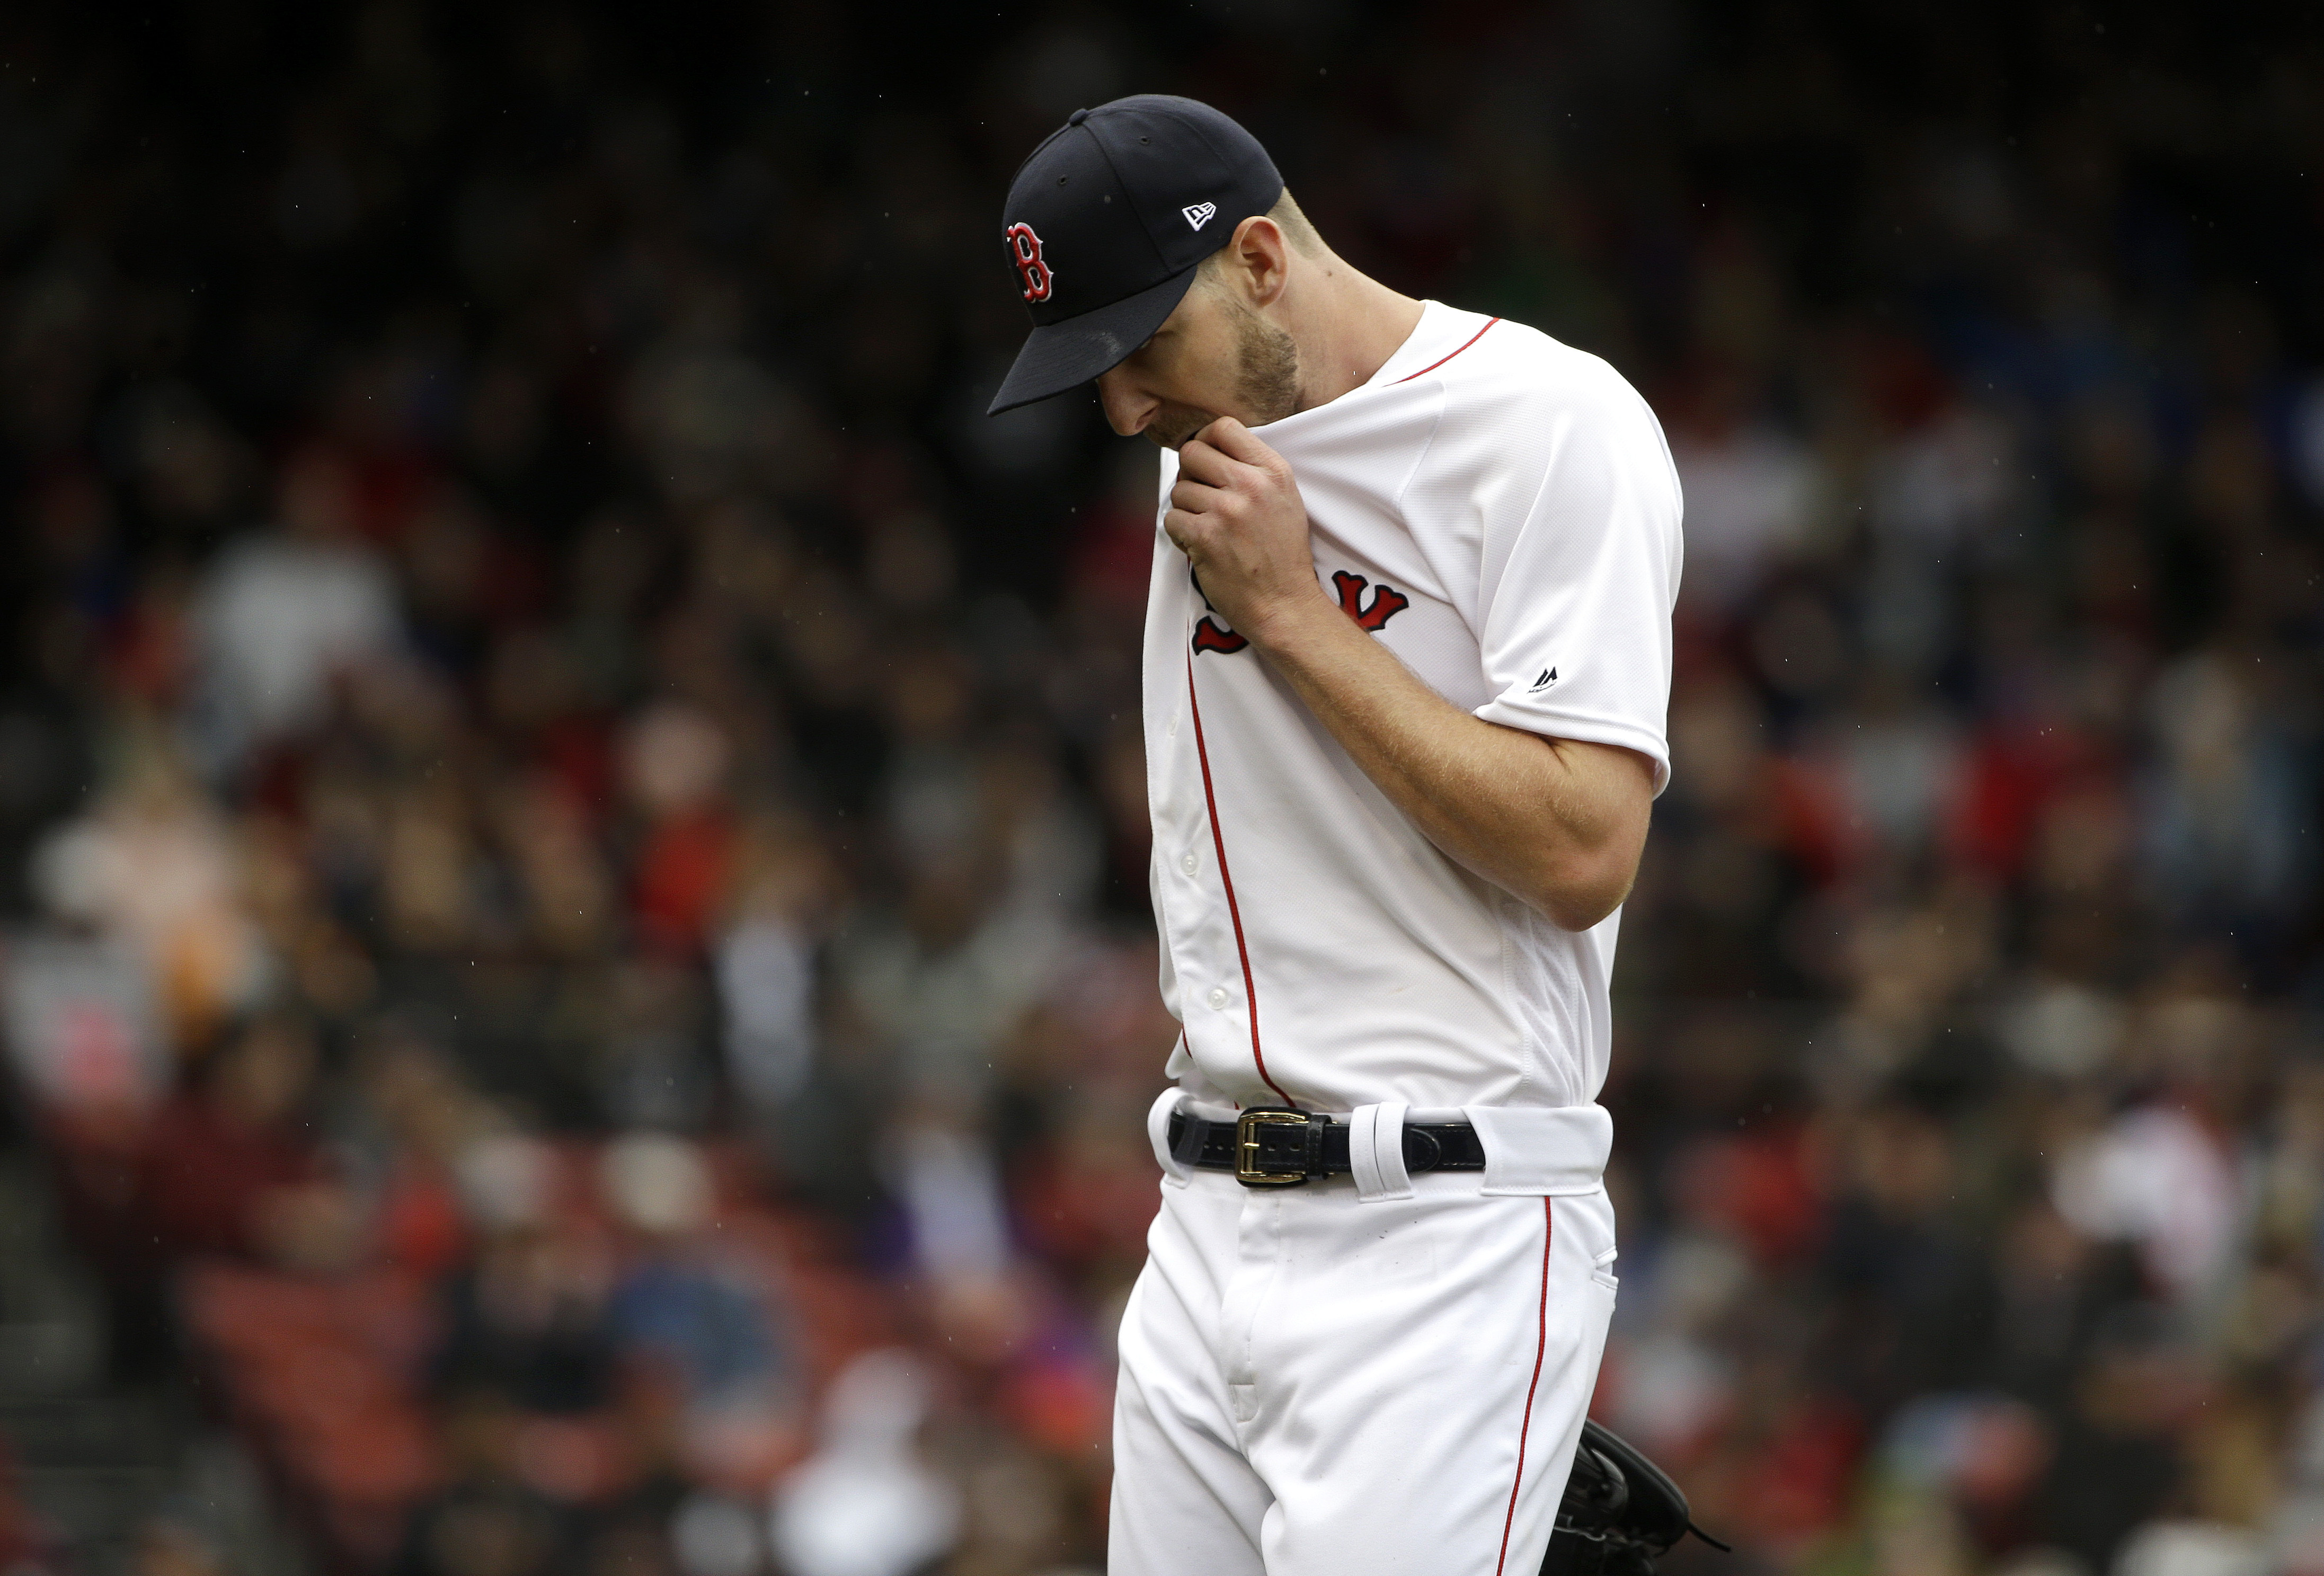 Sale remains winless in 6 starts, drops to 0-5 for Red Sox